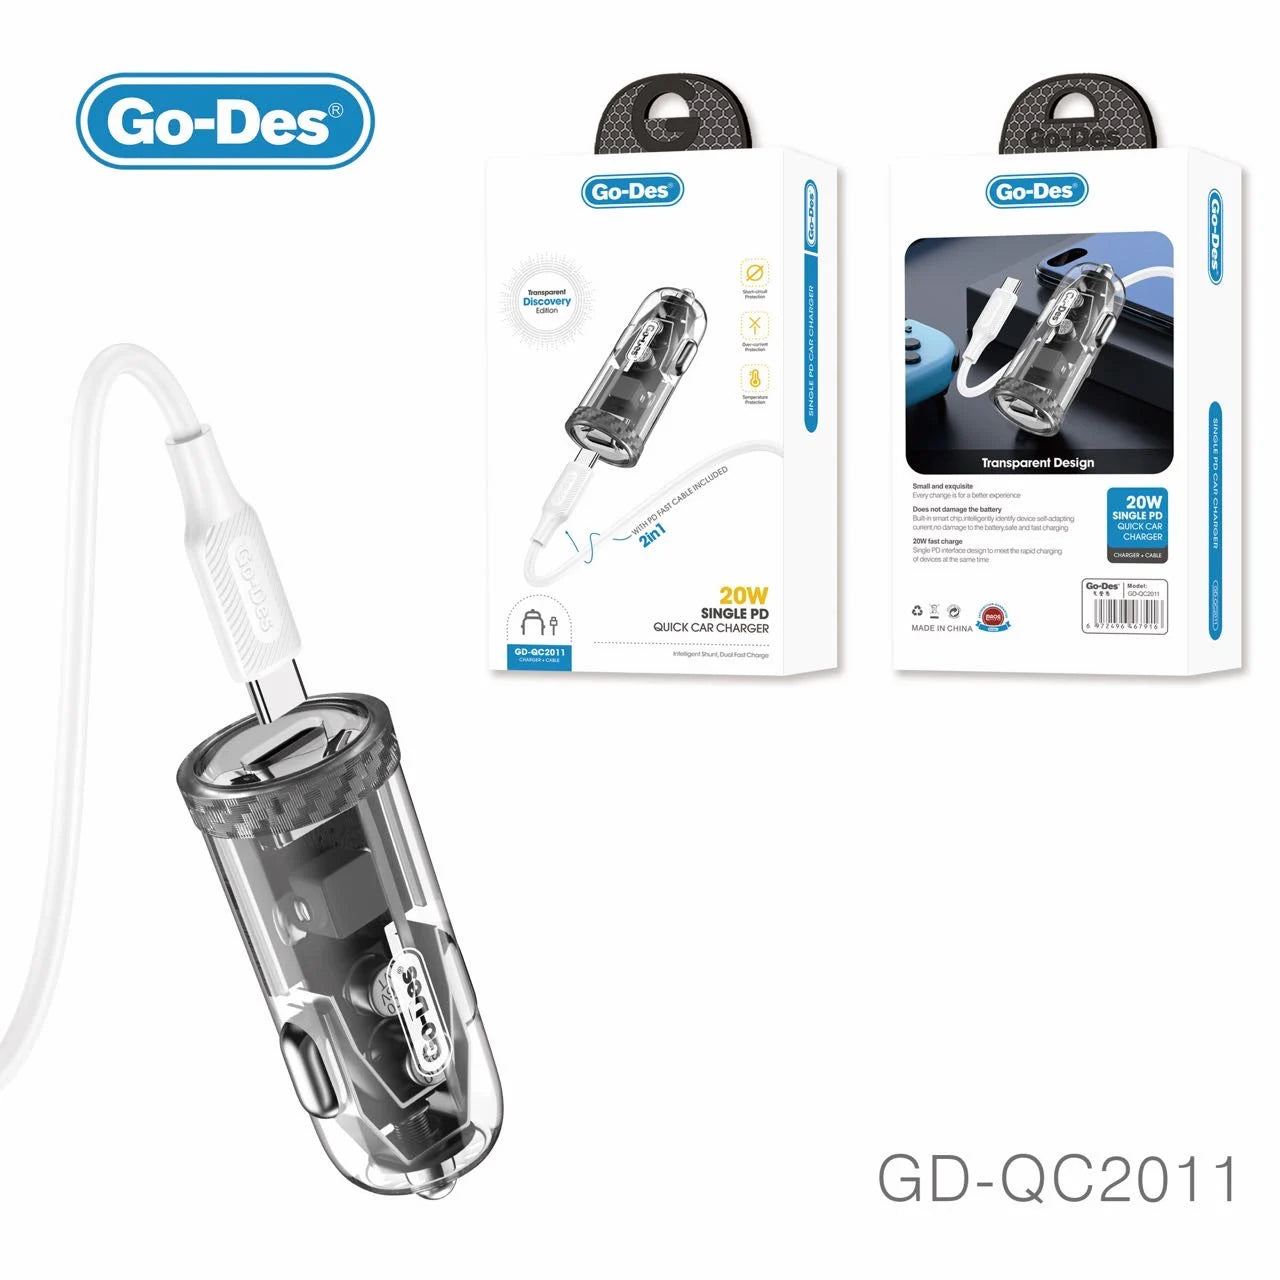 GO-Des 2 in 1 Single PD Car Charger